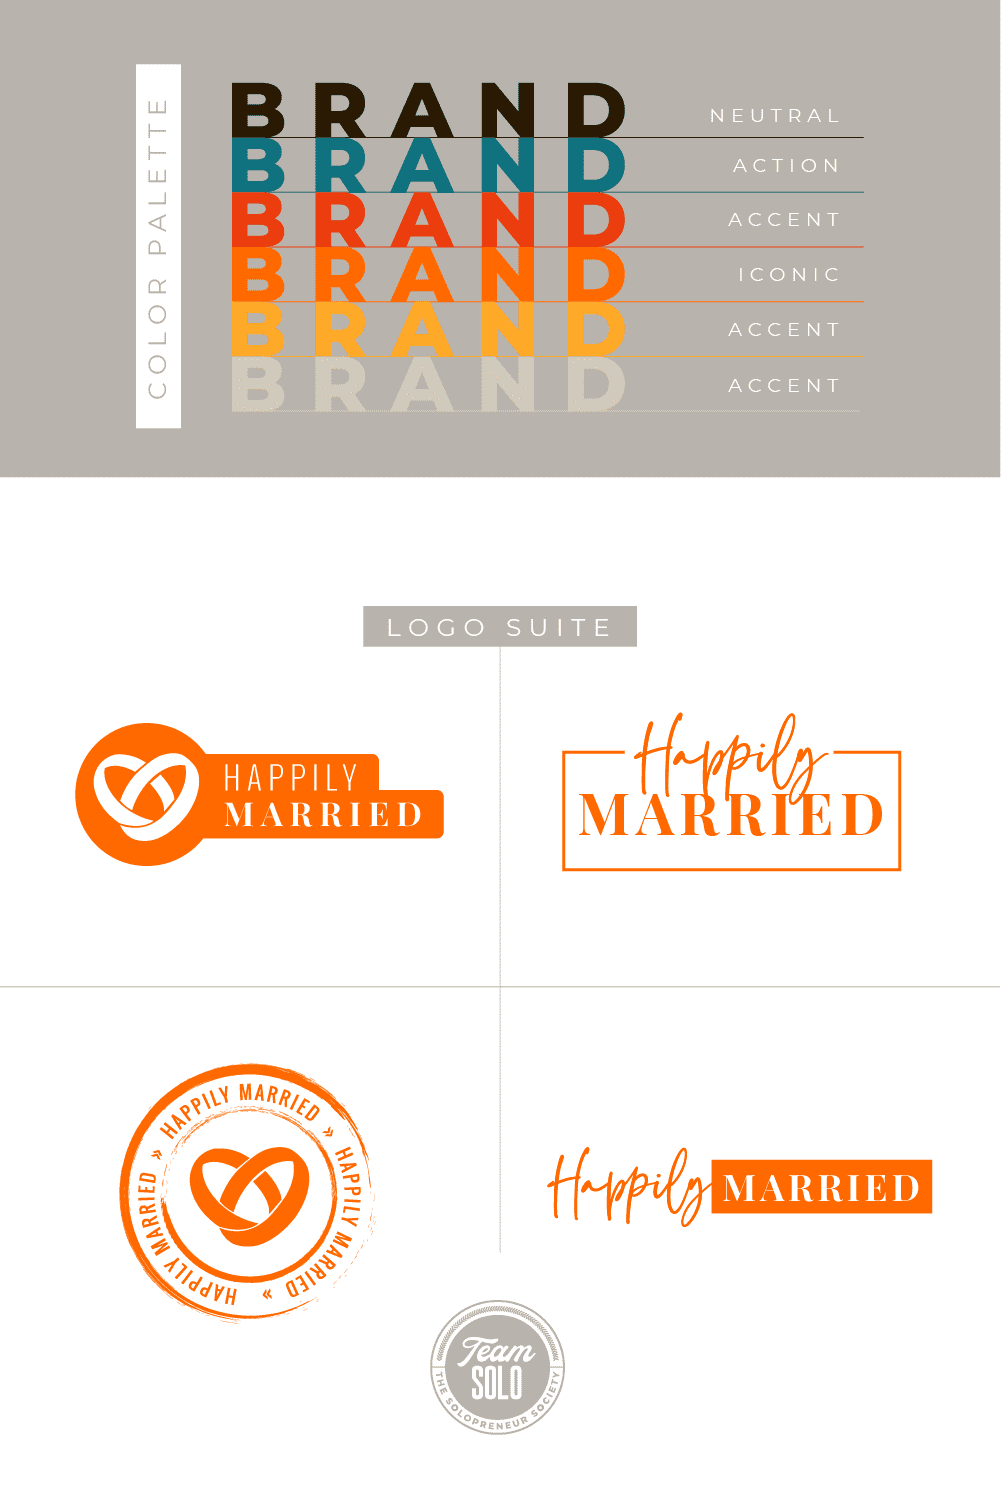 Happily Married Brand Identity Design